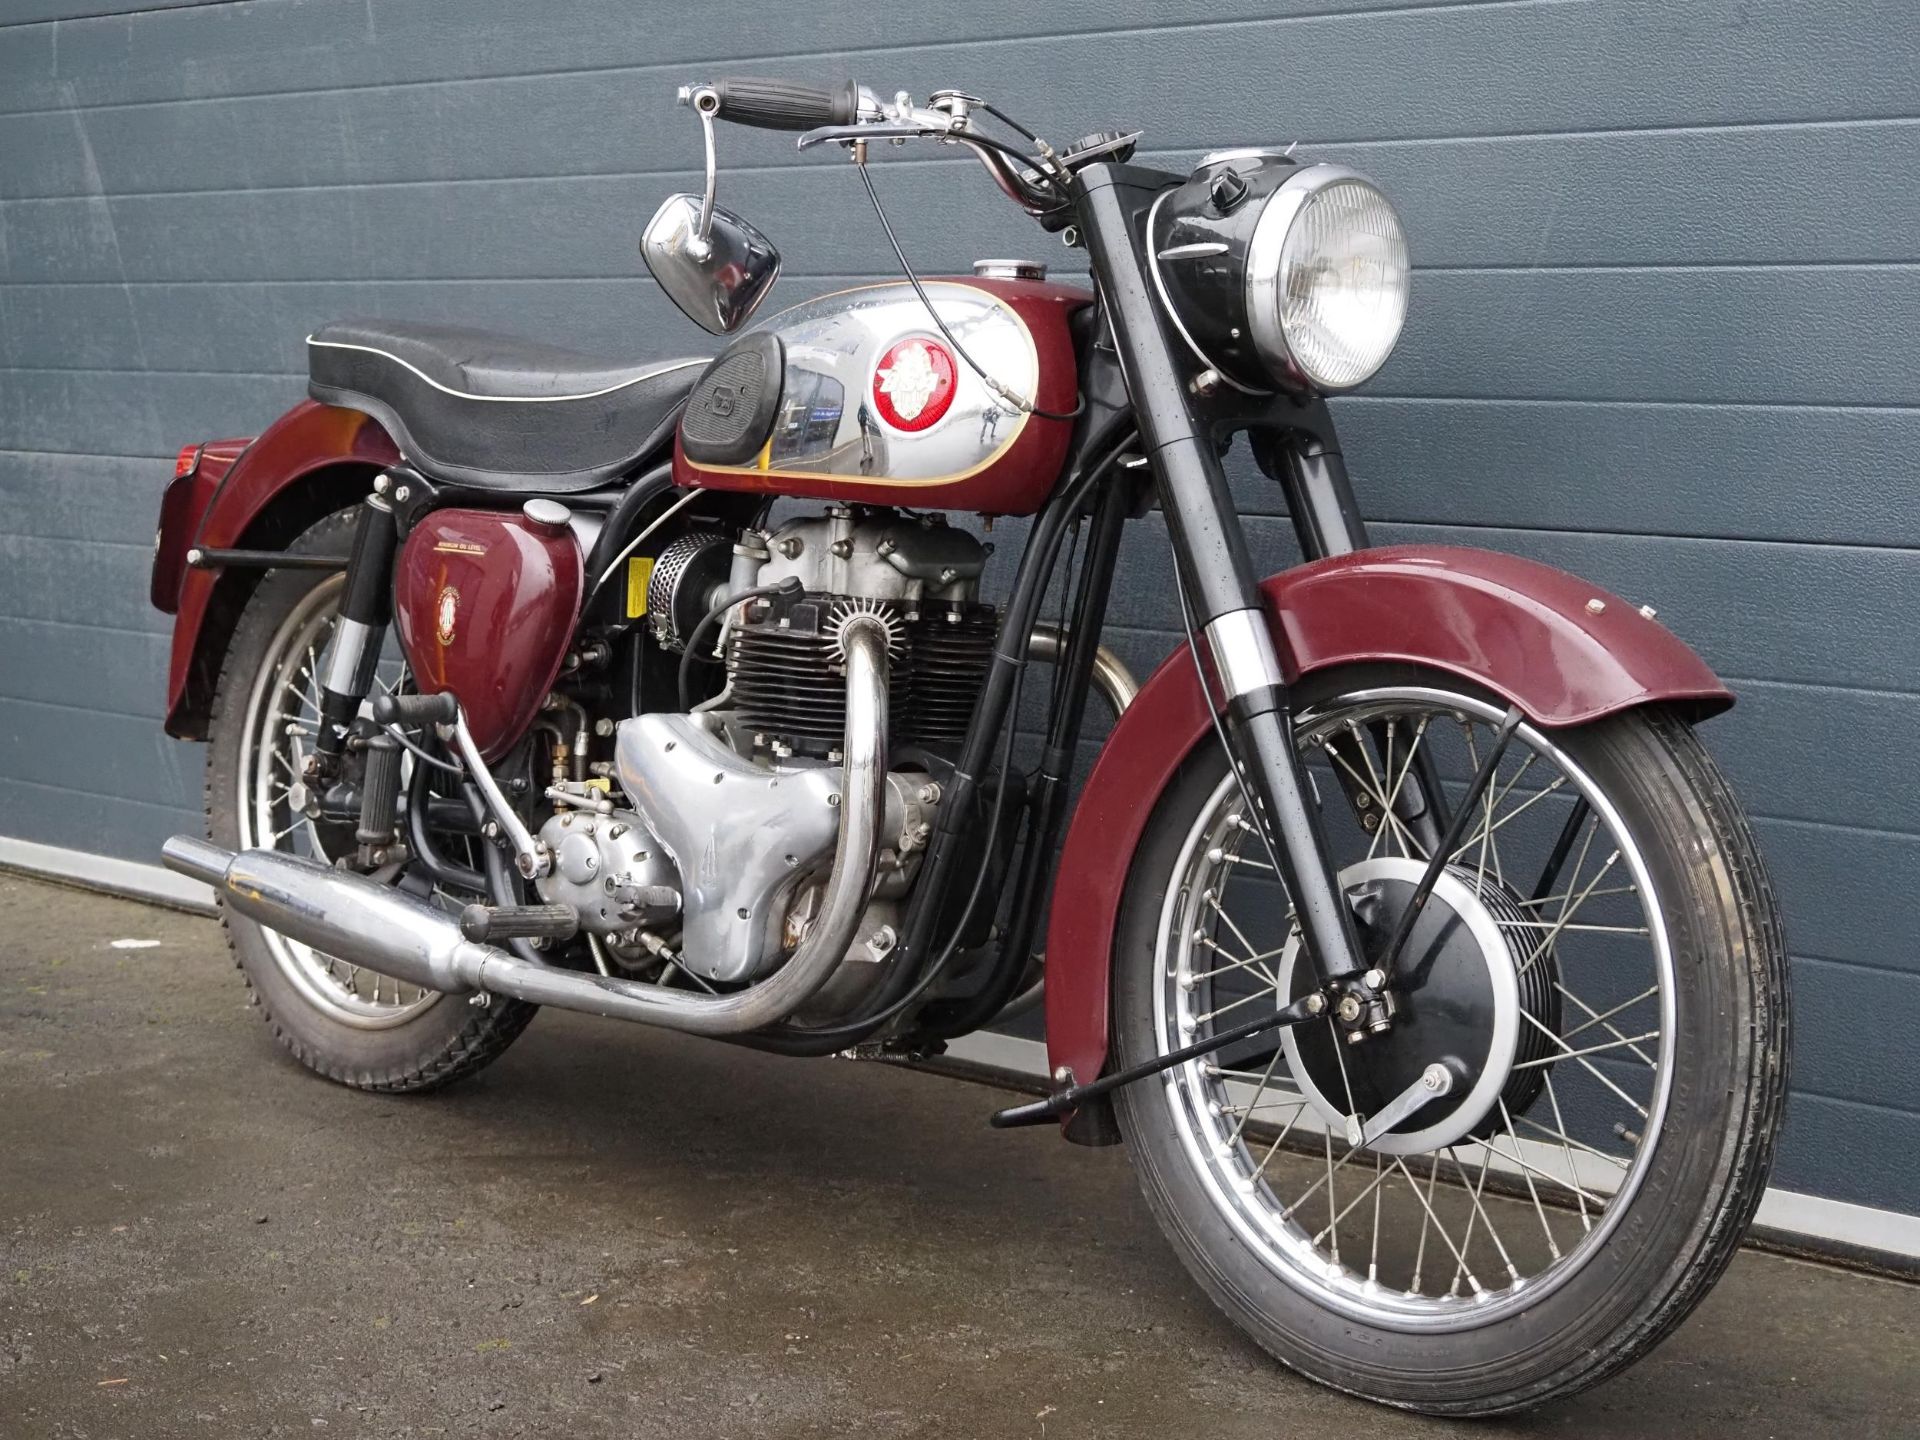 BSA A7 motorcycle. 500cc. 1959. Frame No. A716580 Engine No. CA7 1620 Runs and rides well, lots of - Image 2 of 6